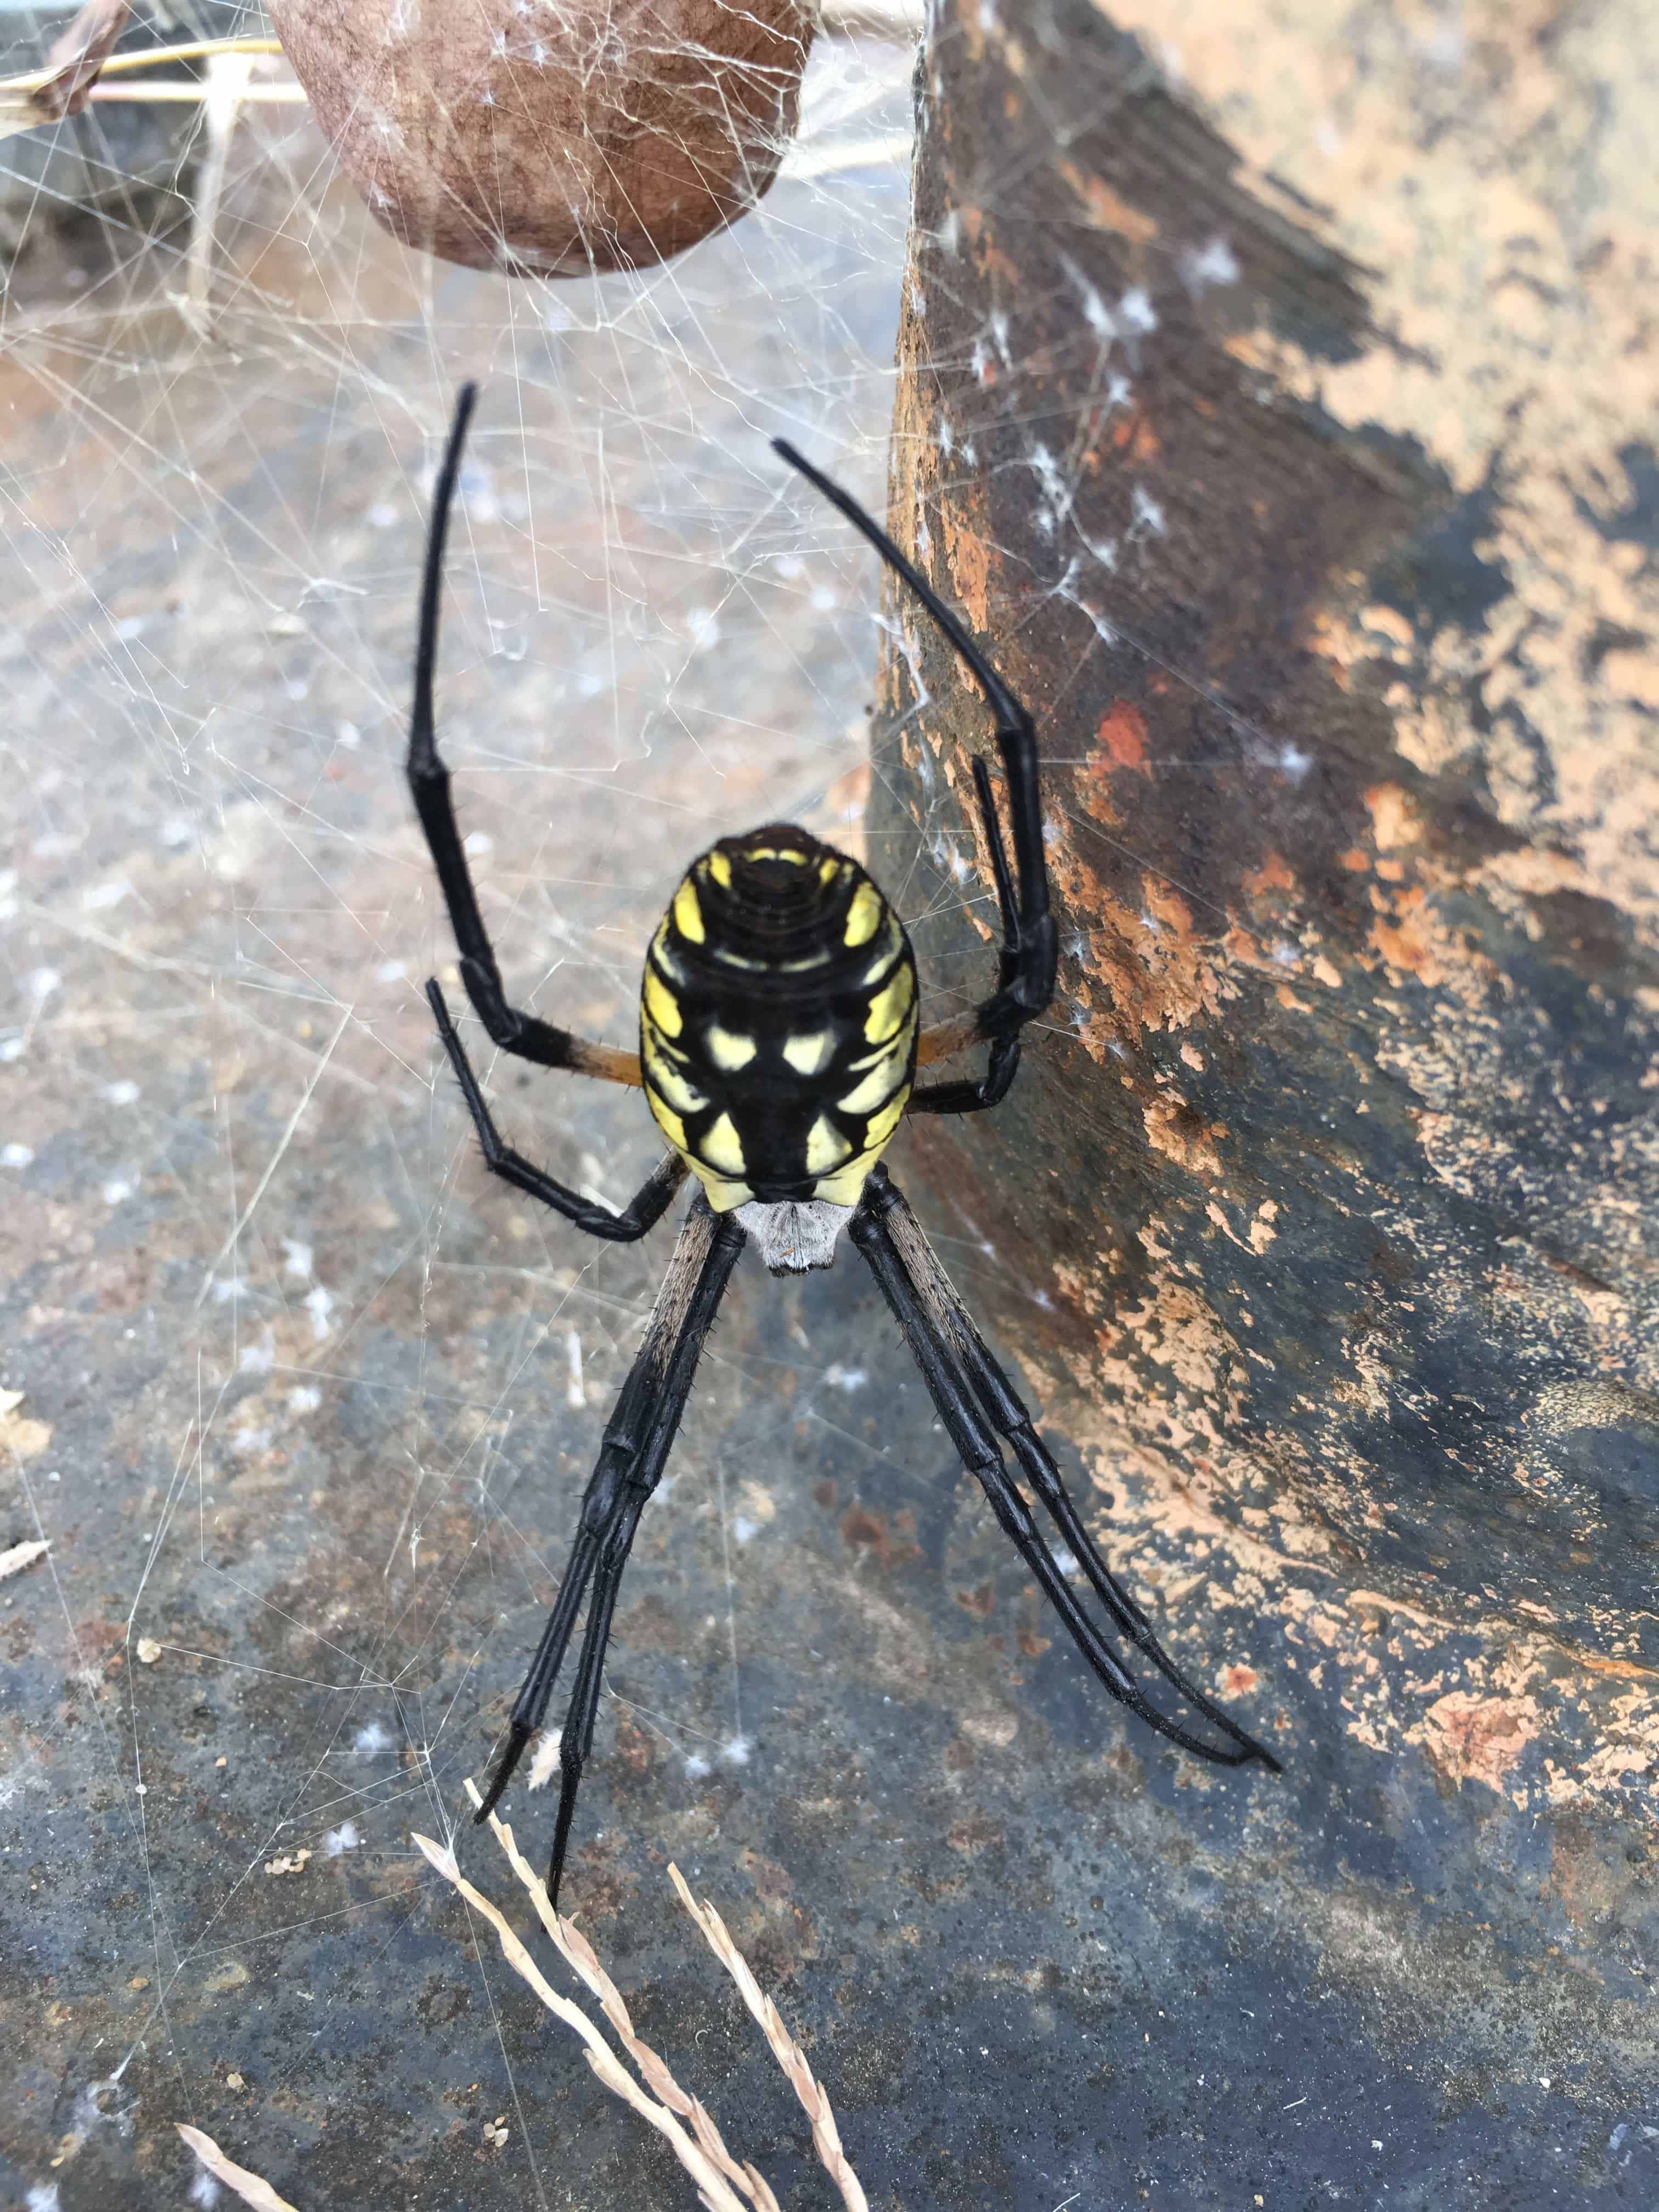 Picture of Argiope aurantia (Black and Yellow Garden Spider) - Female - Dorsal,Egg sacs,Webs